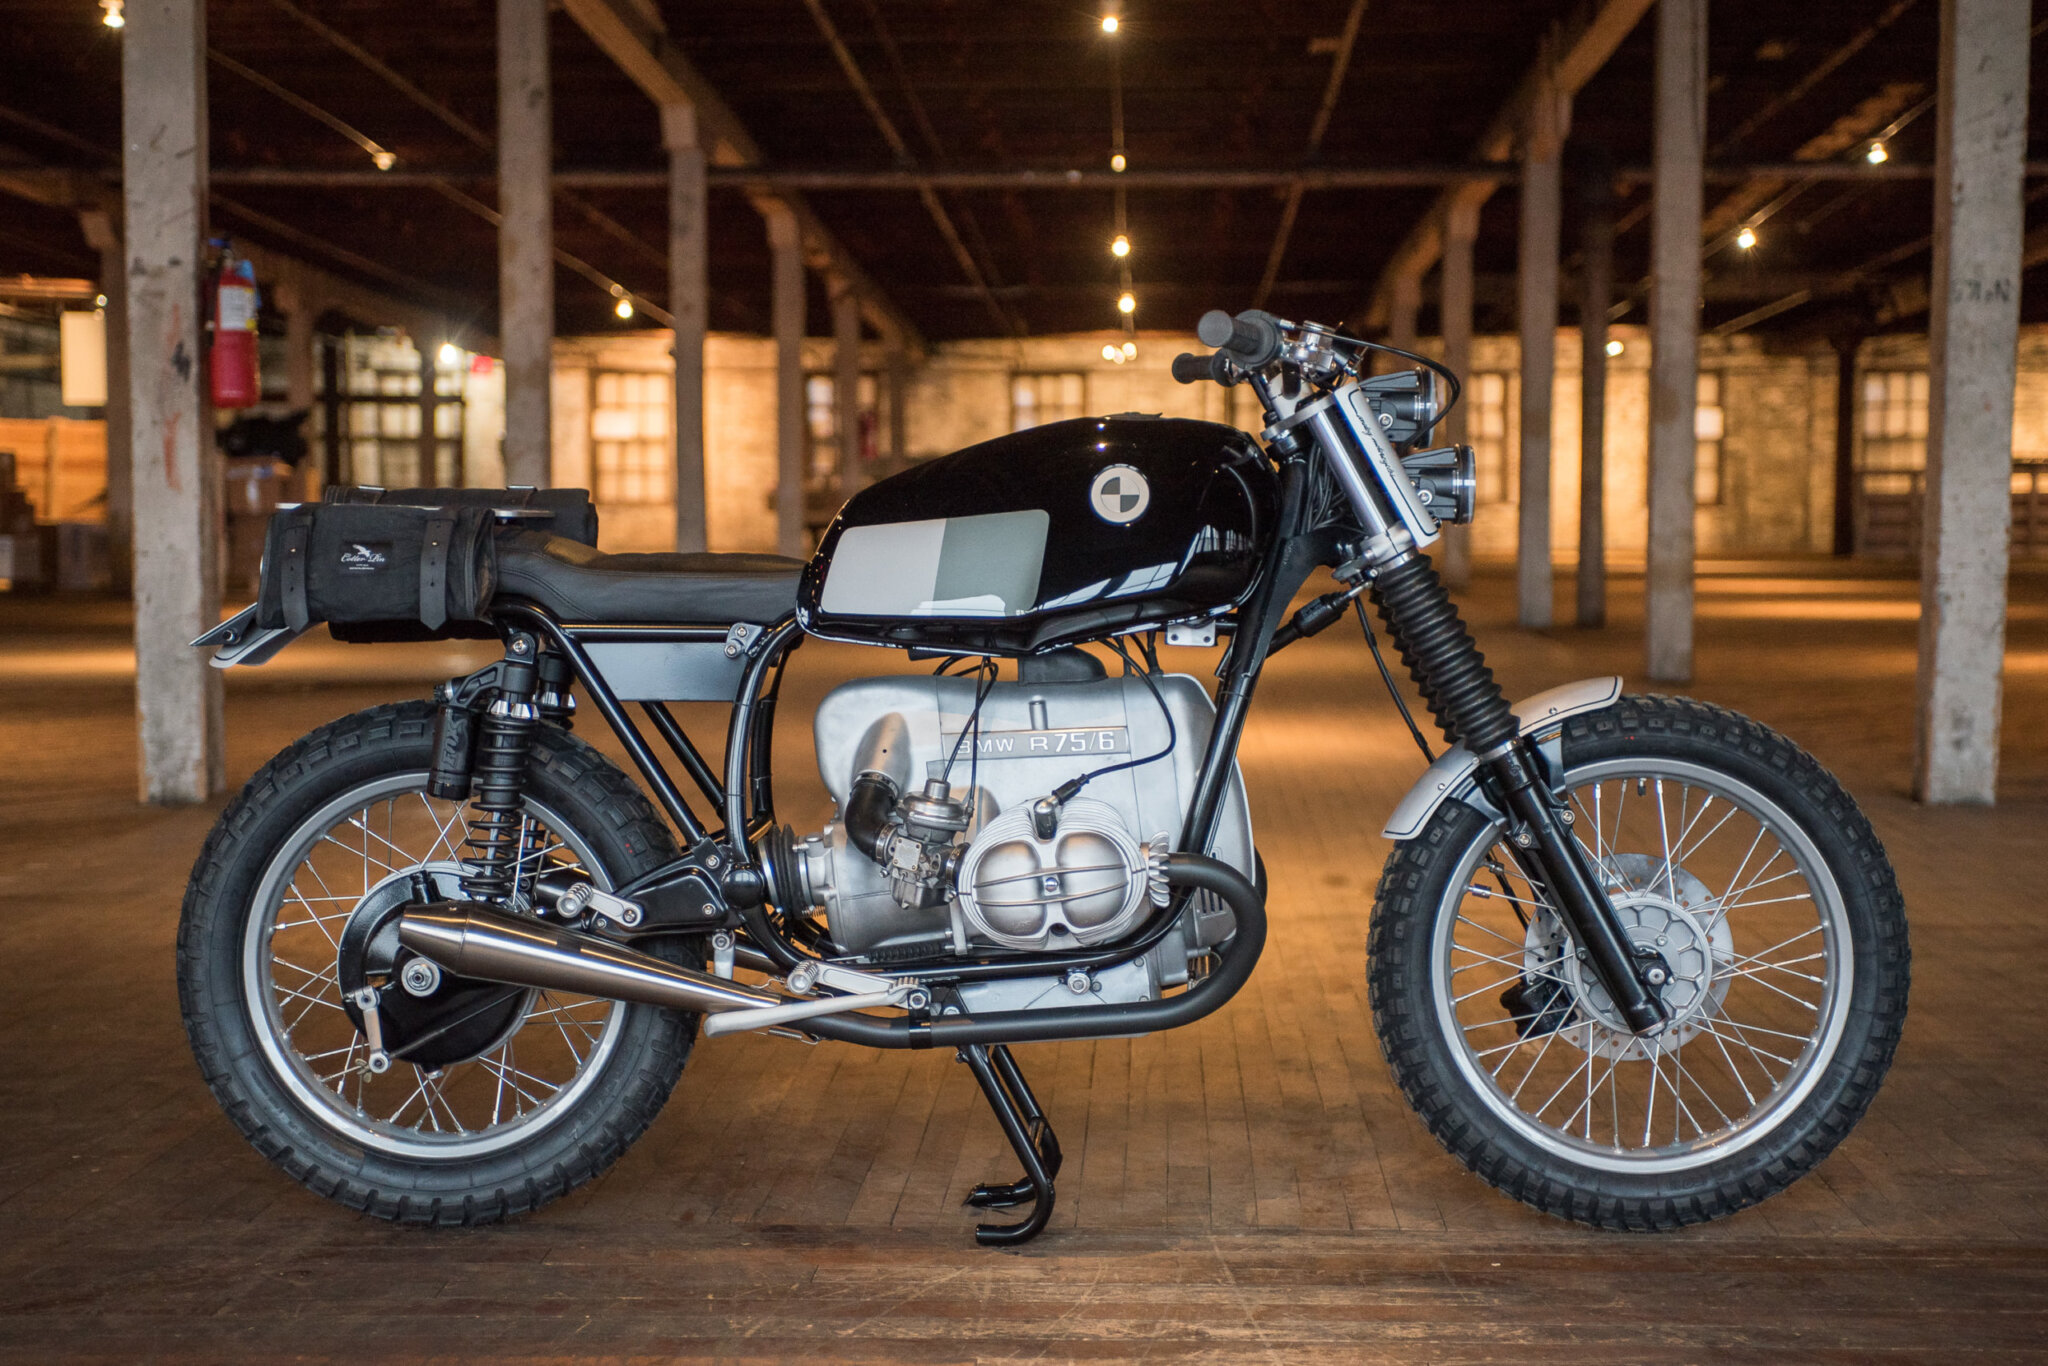 AMA BMW R75GS by Analog Motorcycles